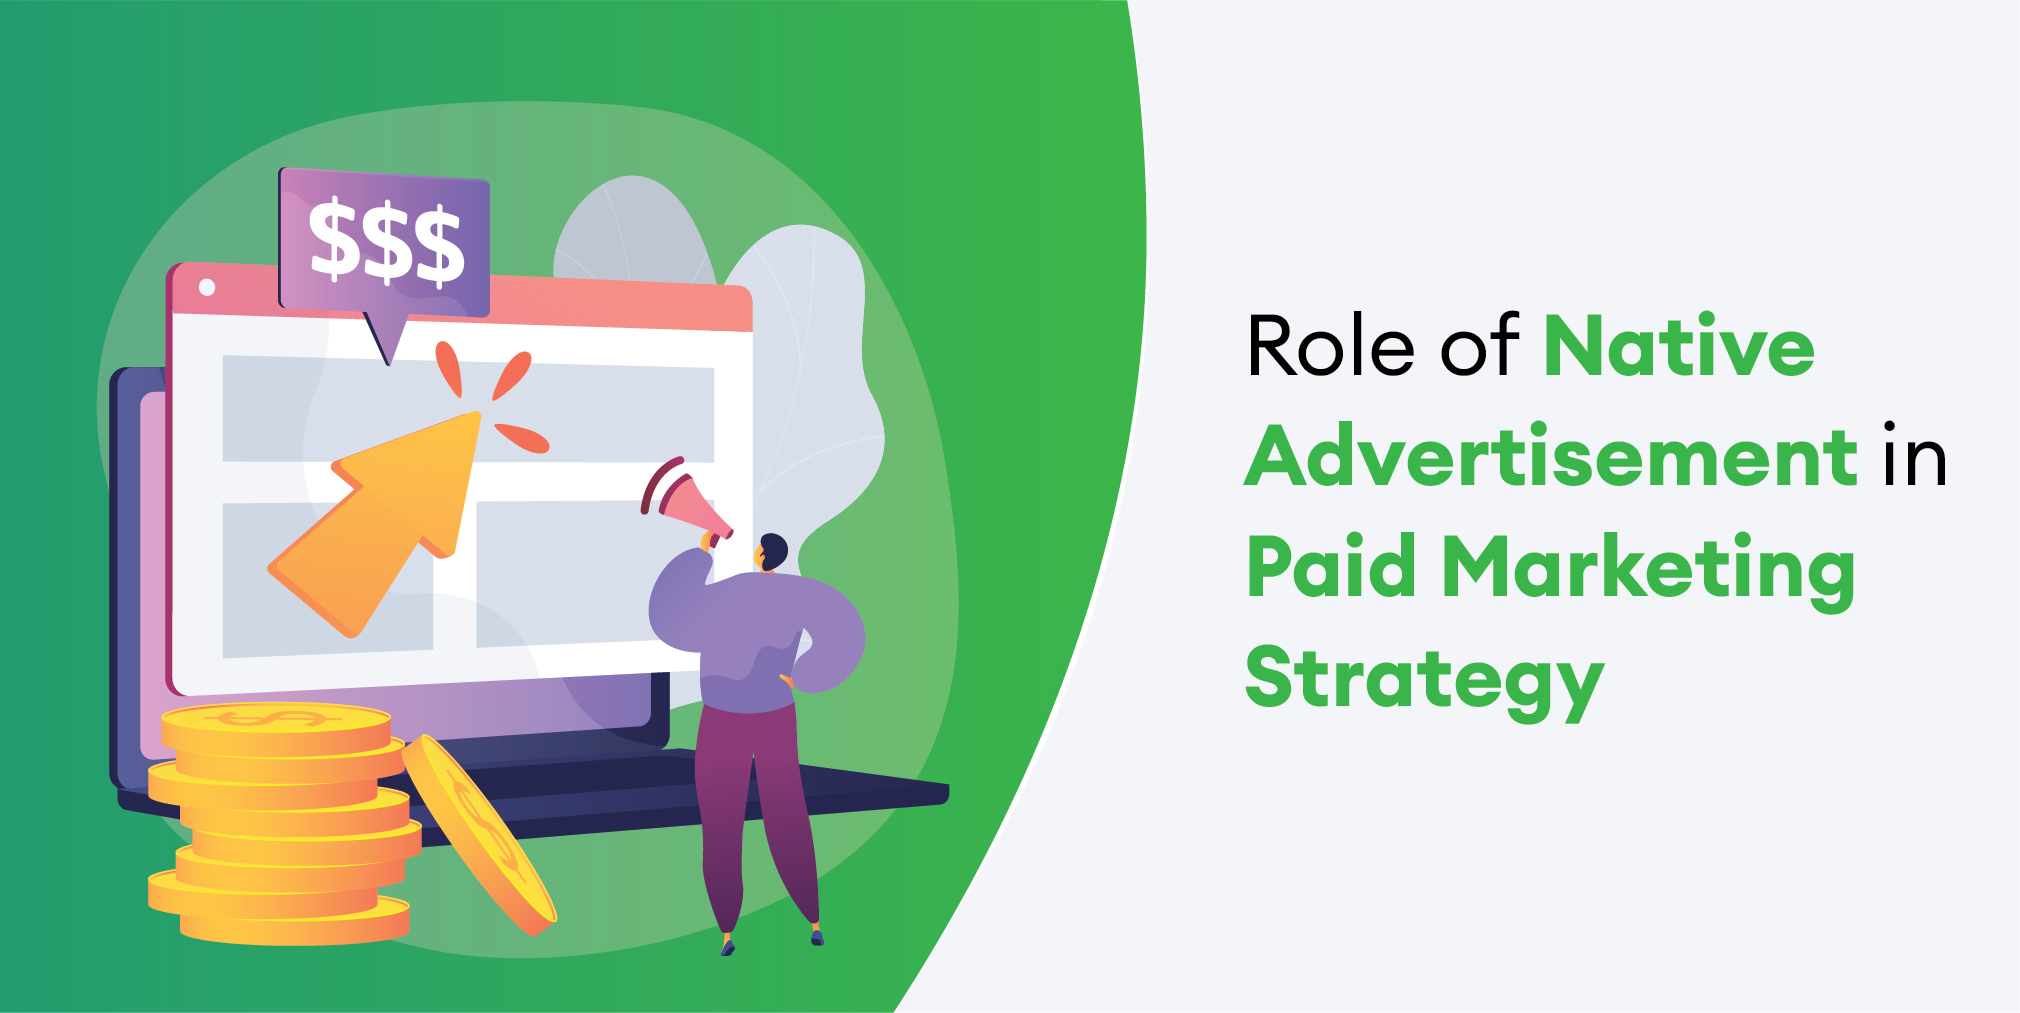 Role of Native Advertisement in Paid Marketing Strategy